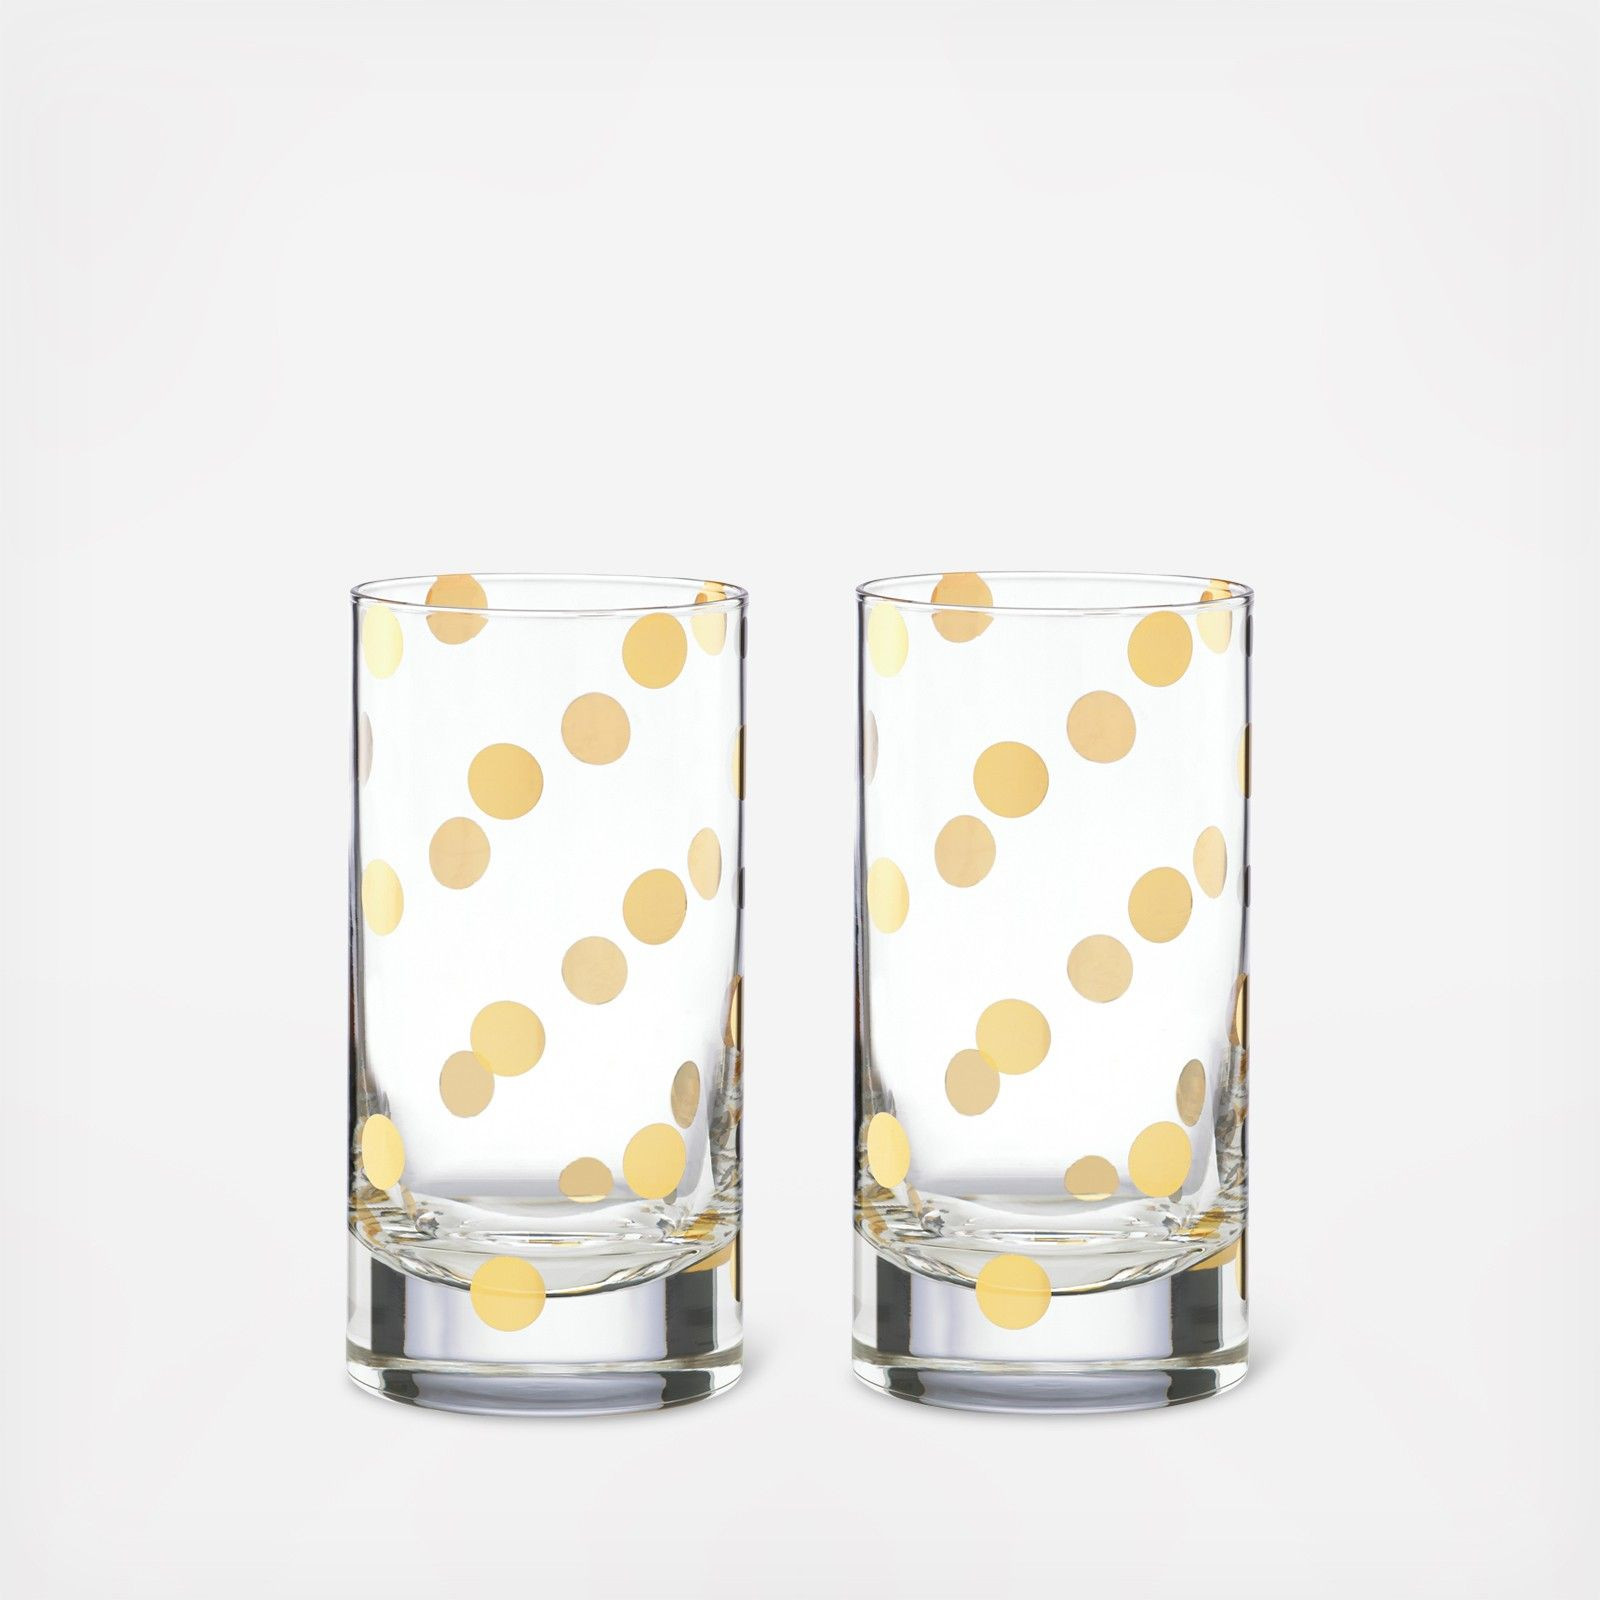 14 Unique Kate Spade Glass Vase 2024 free download kate spade glass vase of pearl place hiball glass set of 2 by kate spade new york wedding with these whimsical highball glasses are designed with a black tie affair in mind and feature a met